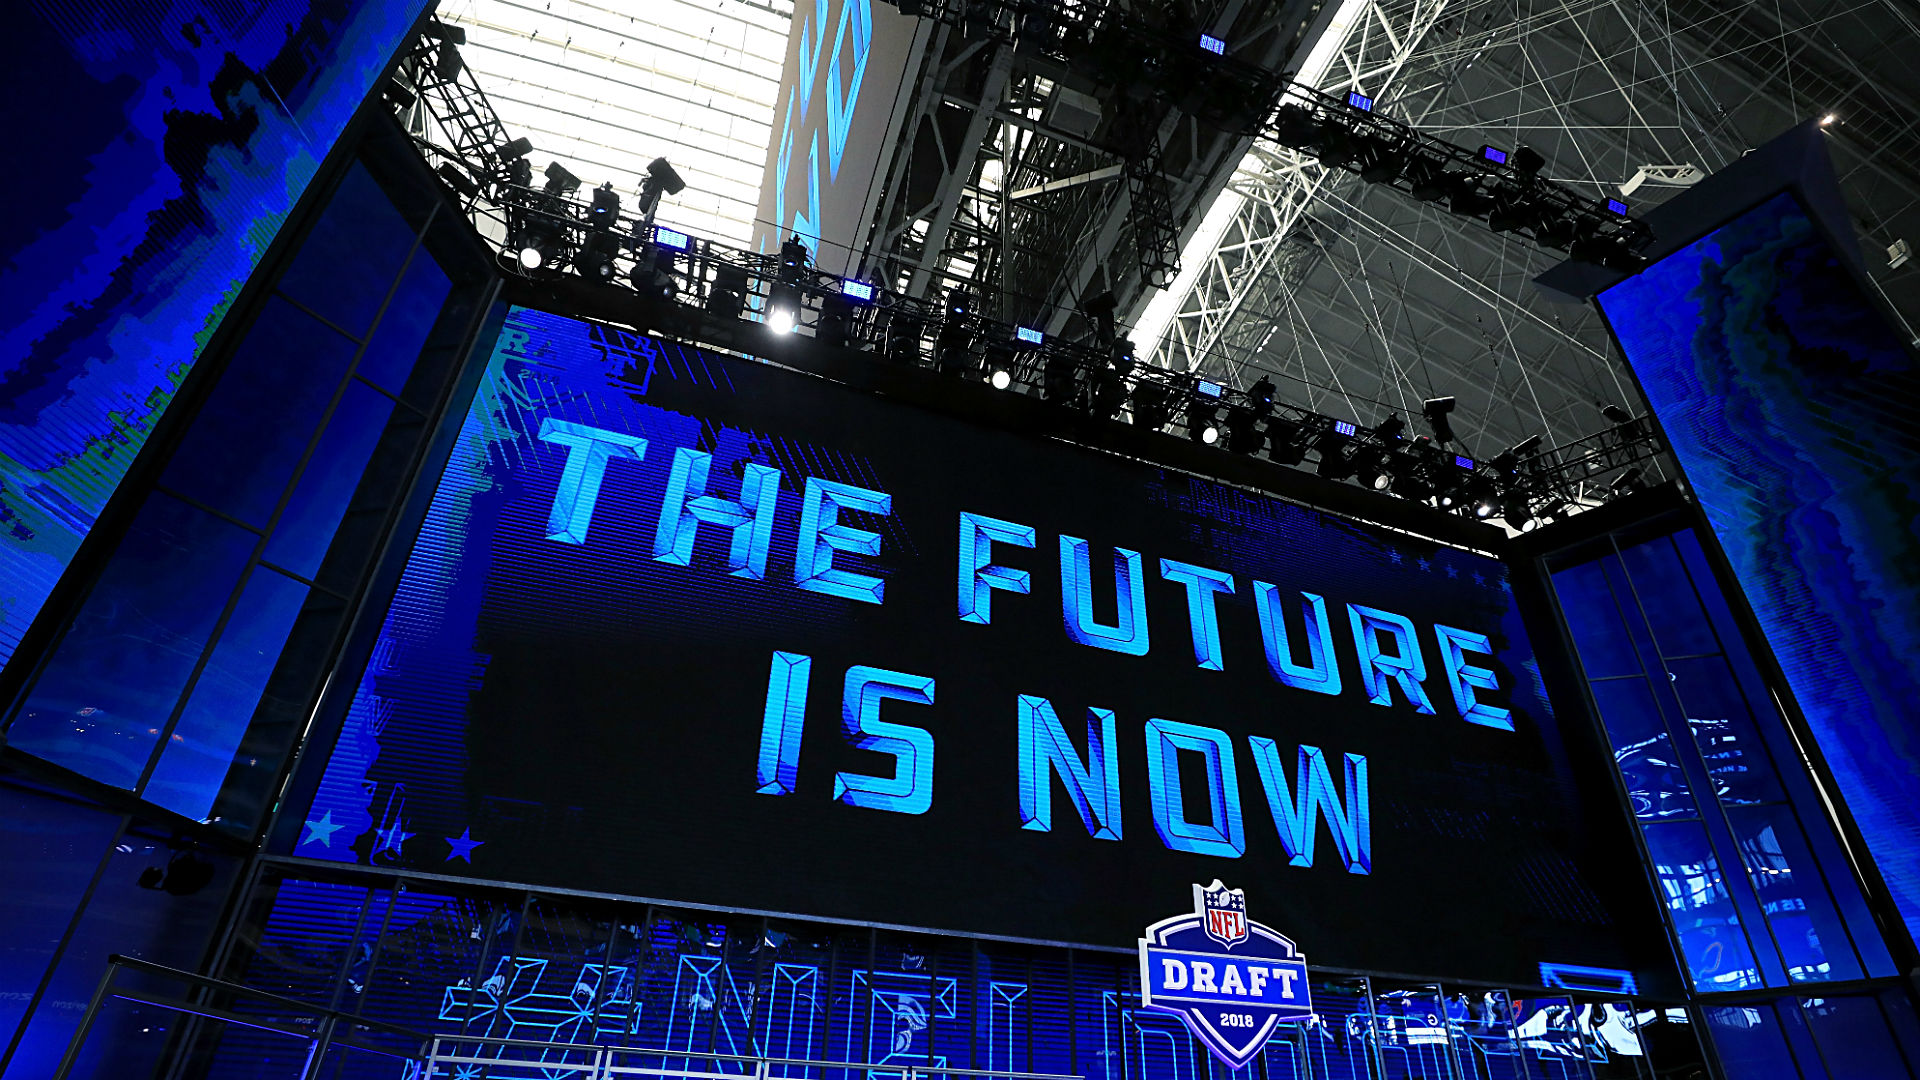 Future NFL Draft locations: Host cities for 2020 NFL Draft and beyond | Sporting News1920 x 1080